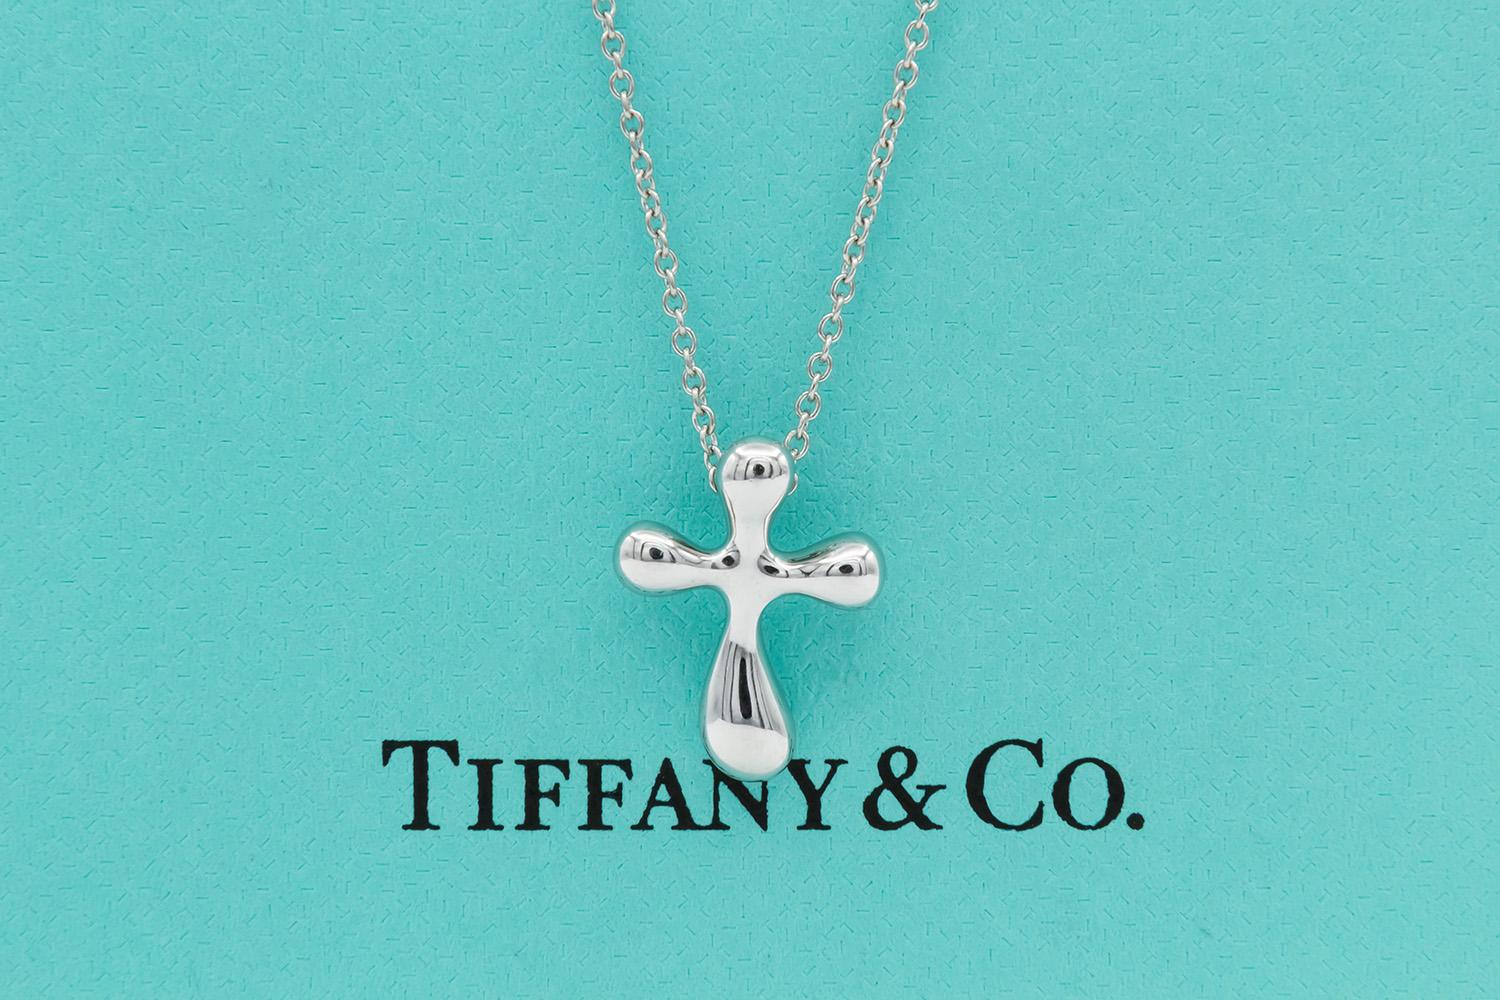 We are pleased to offer this Authentic Tiffany & Co. Elsa Peretti Platinum Cross Pendant Necklace. Elsa Peretti, a true pioneer of design, translates all she sees in the natural world into jewelry that is sculptural, organic and irresistibly